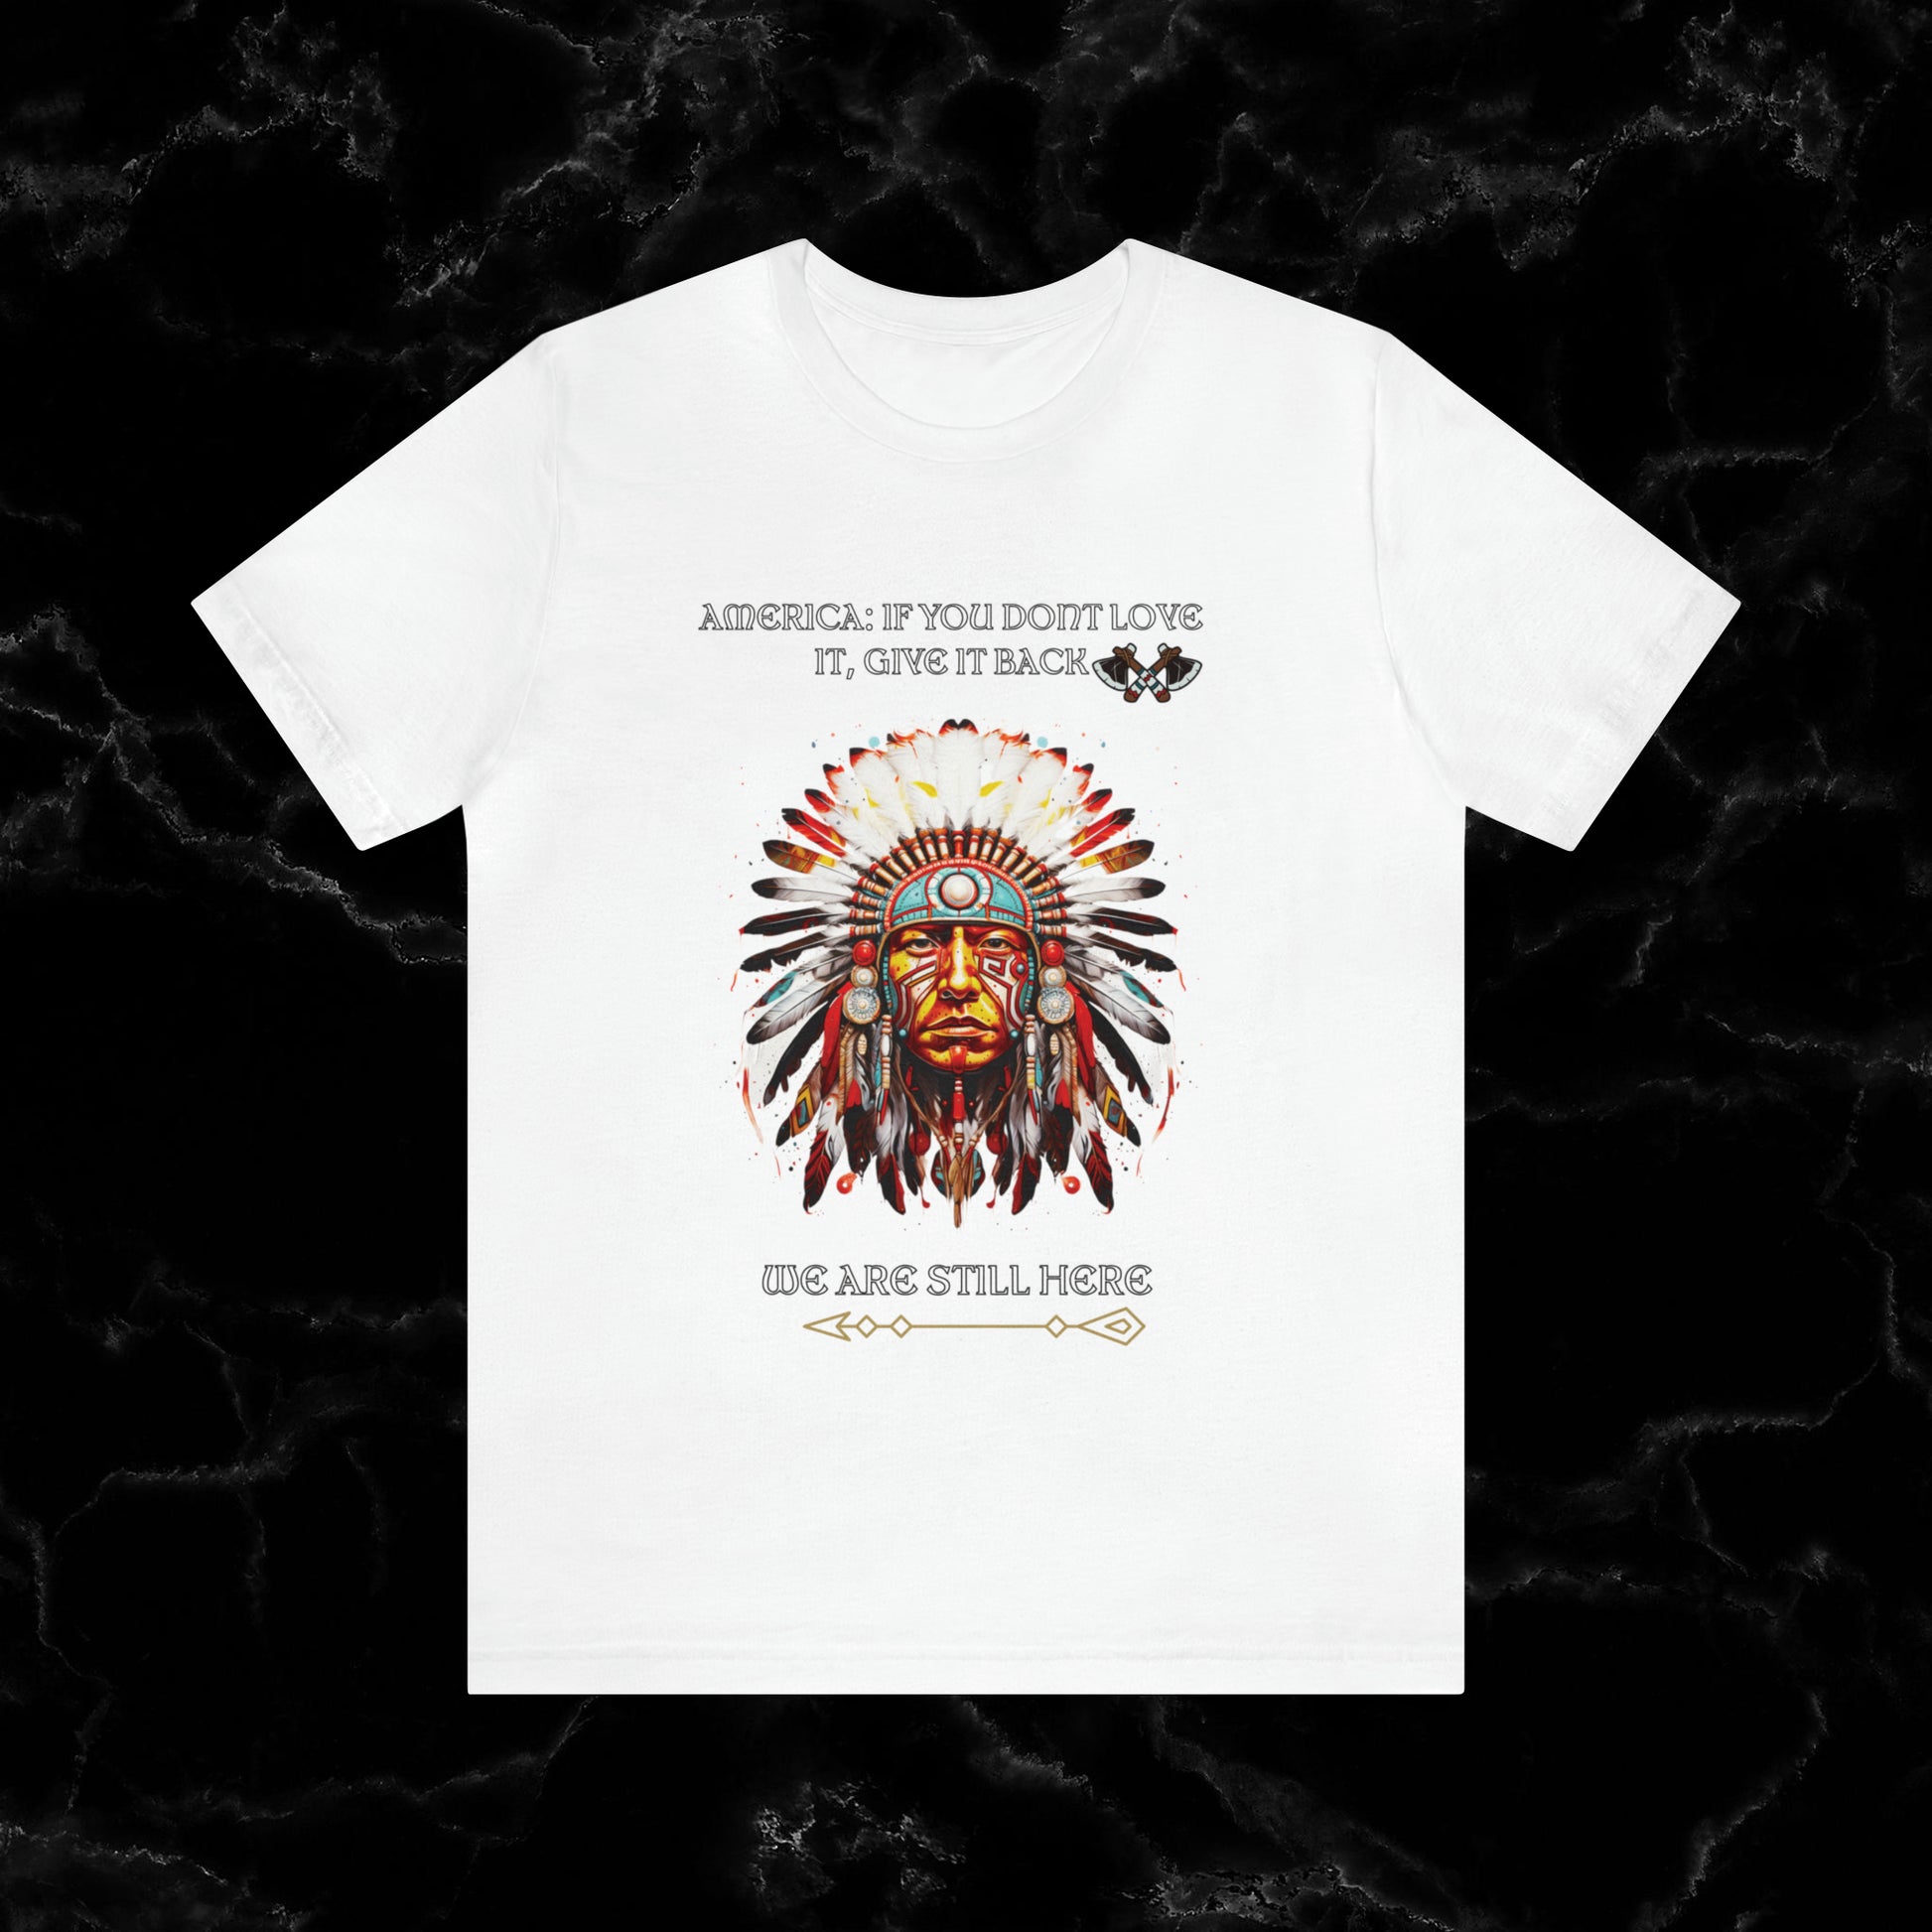 America Love it Or Give It Back Vintage T-Shirt - Indigenous Native Shirt T-Shirt White S 